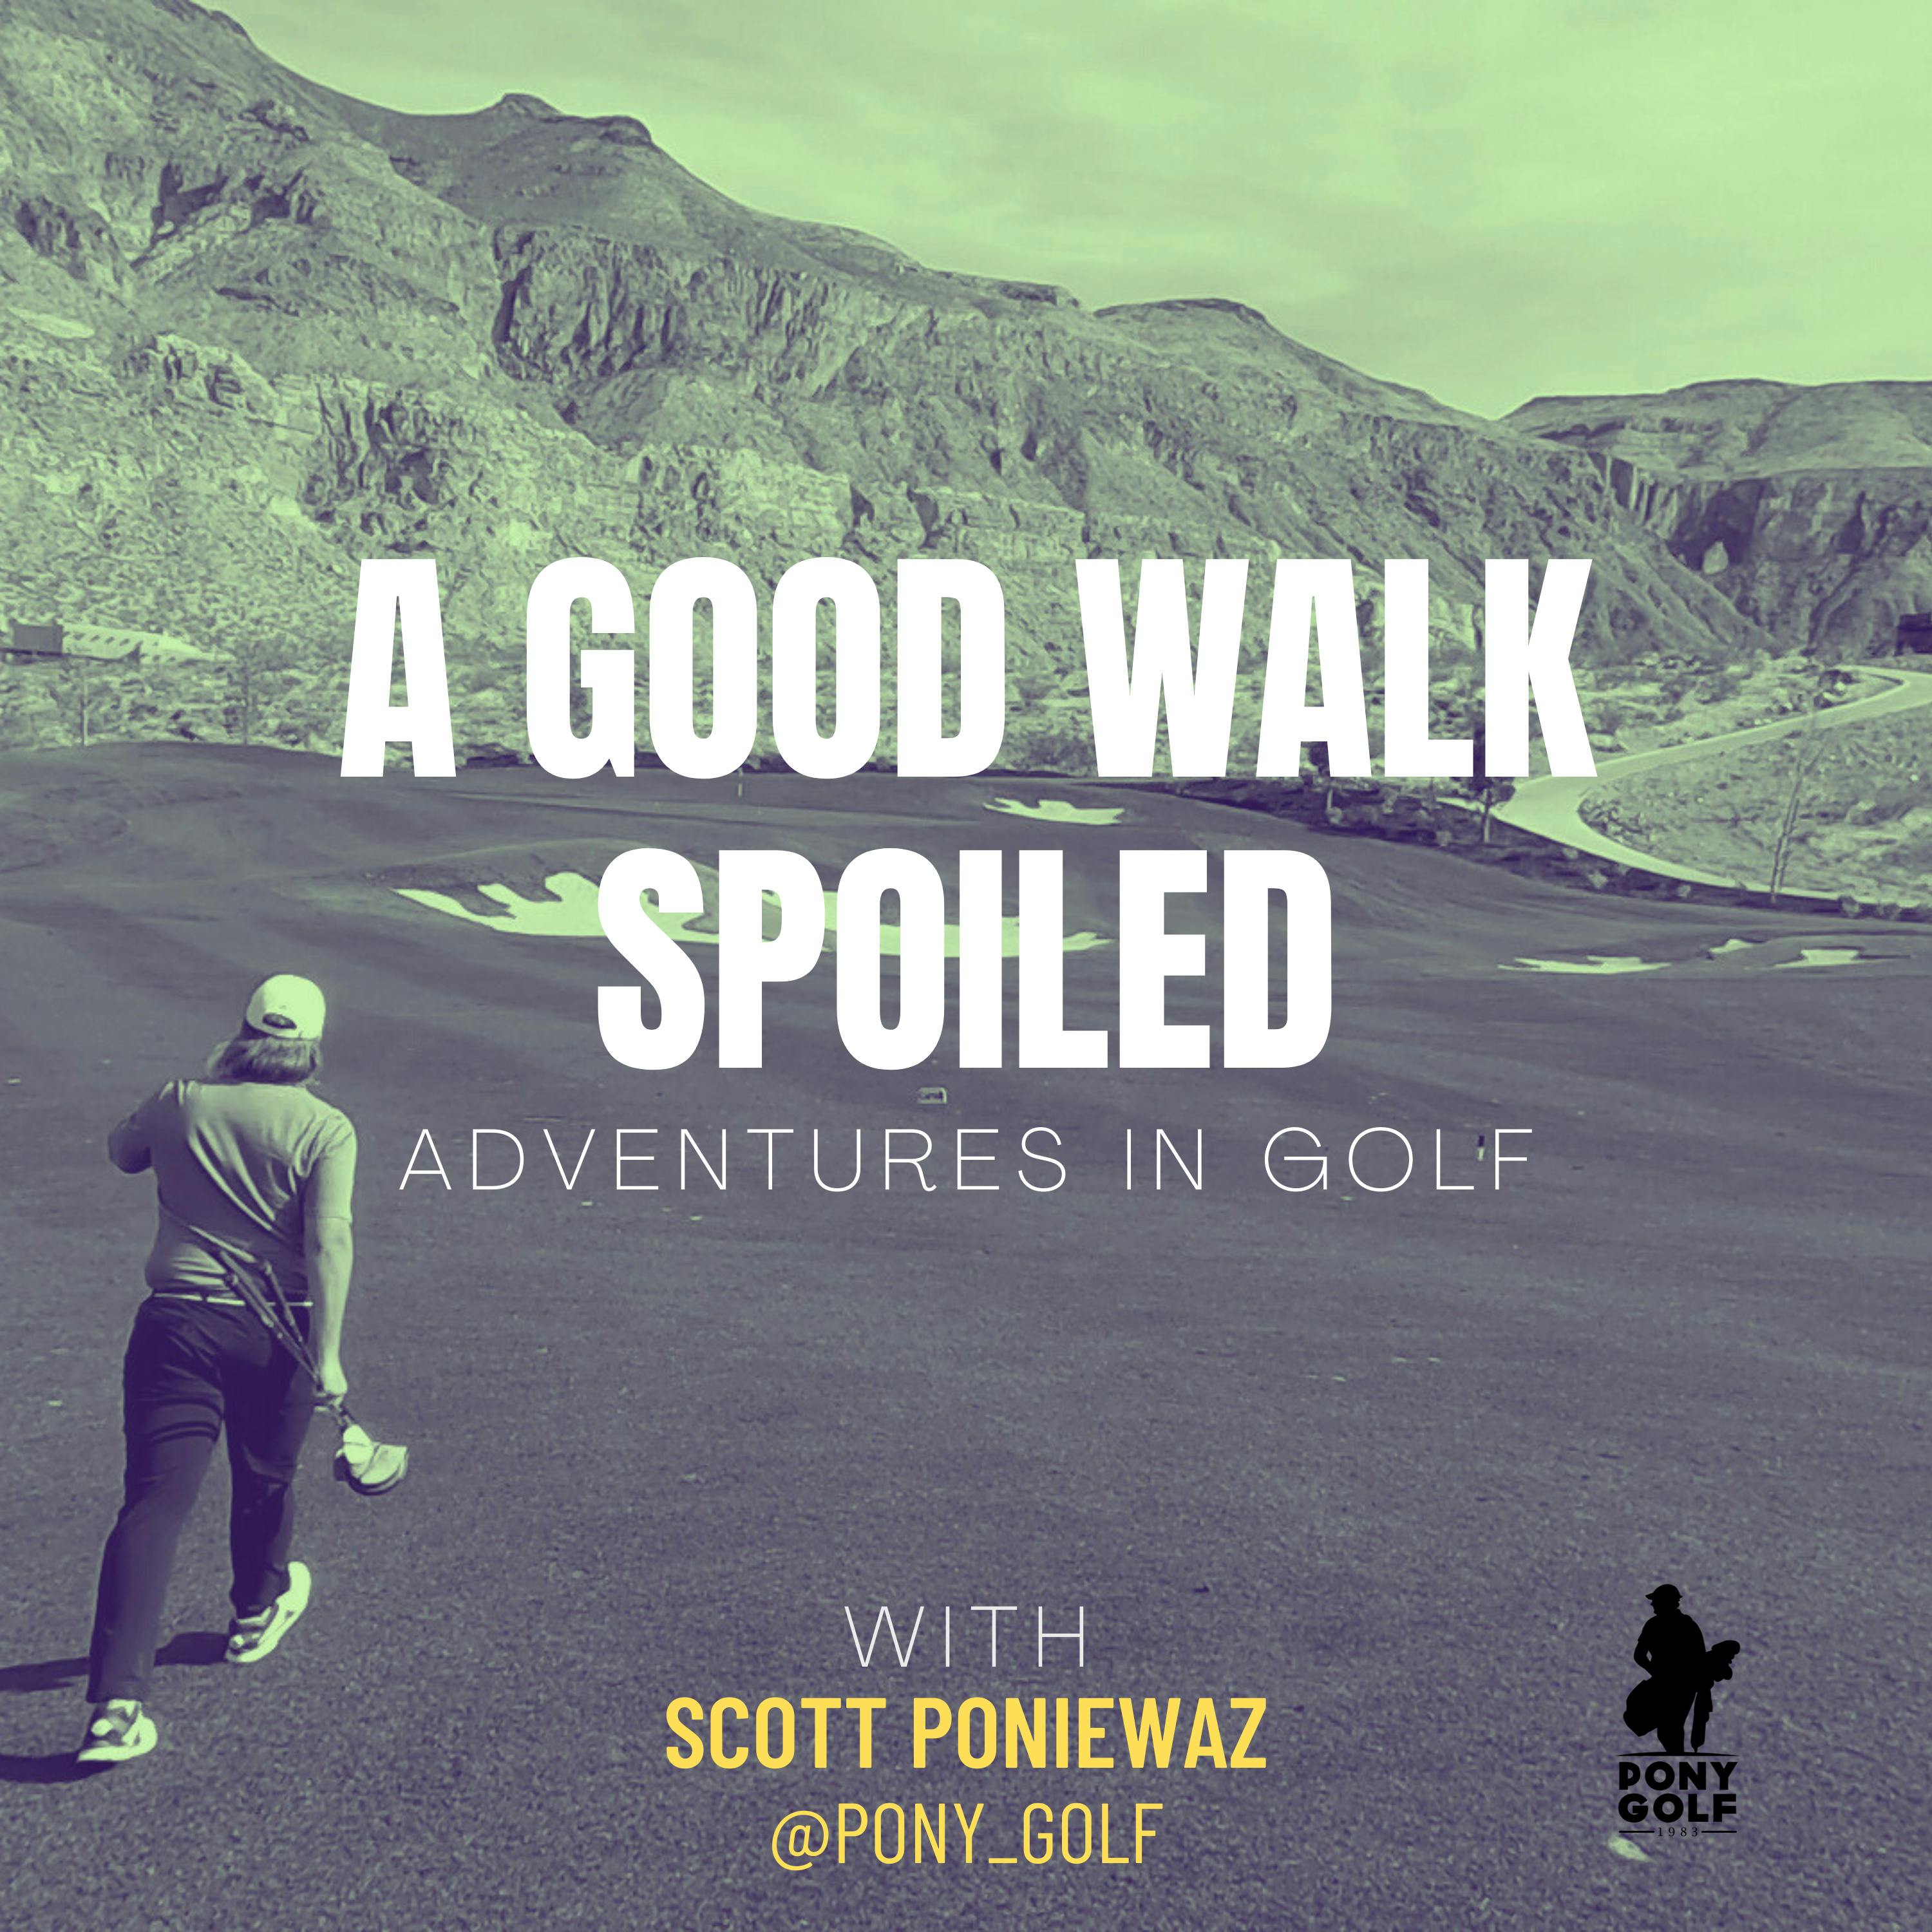 A Good Walk Spoiled: Adventures in Golf Image